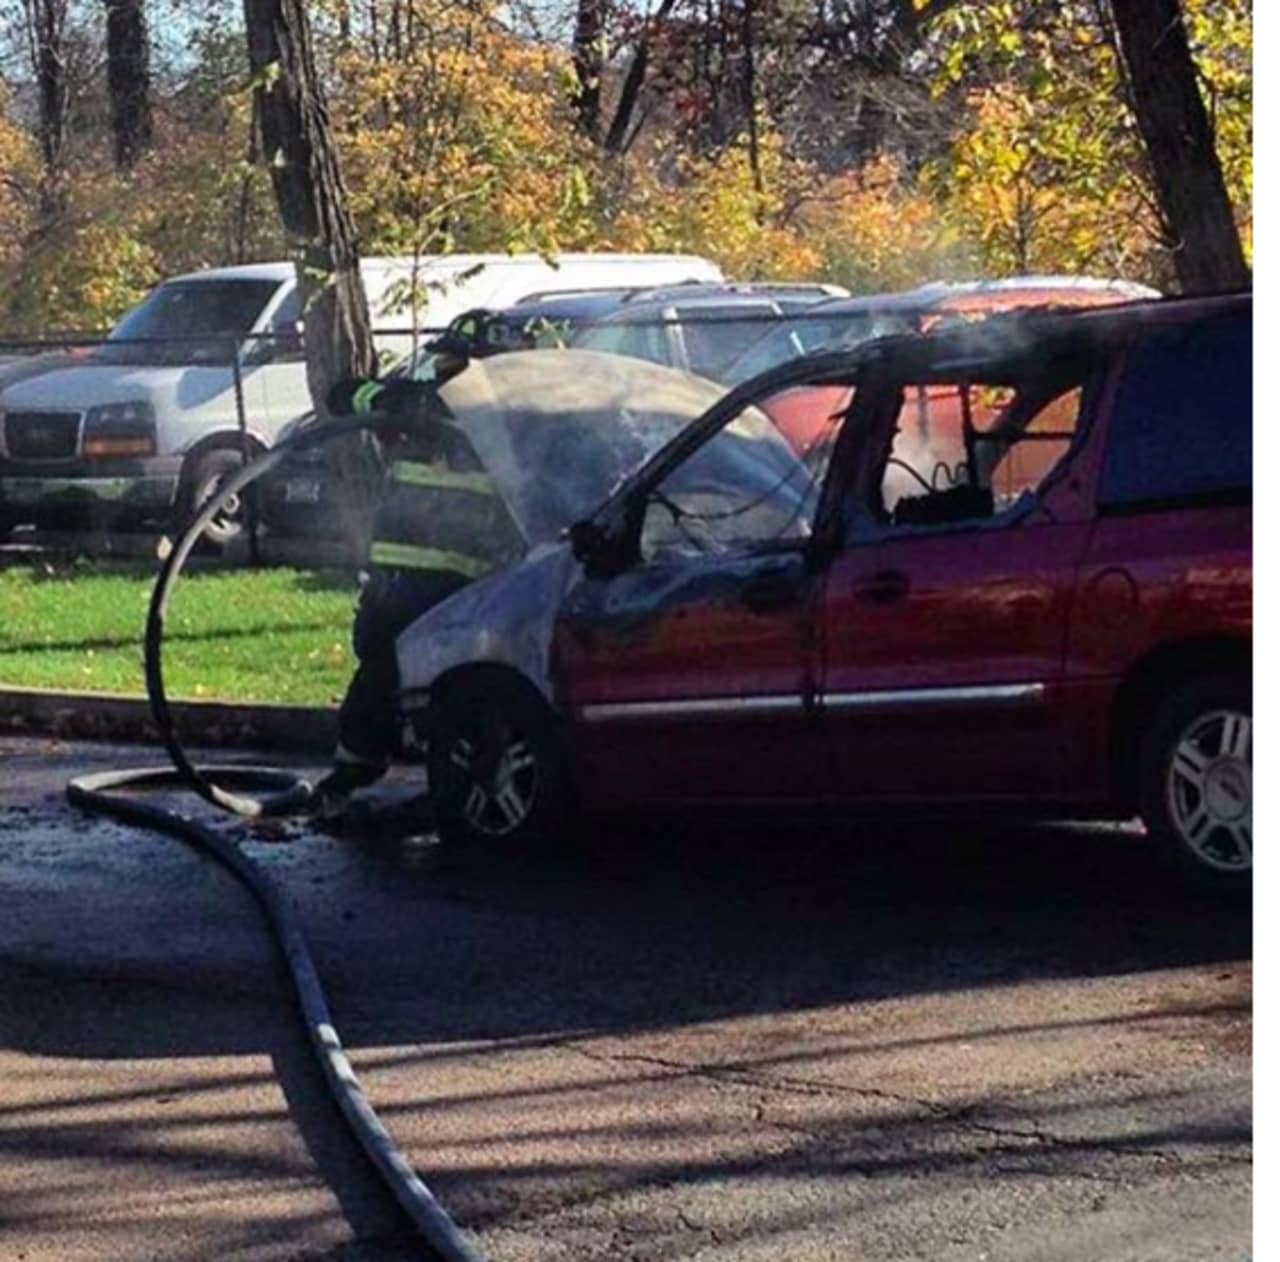 Mamaroneck volunteer firefighters extinguised a car fire on Monday afternoon.